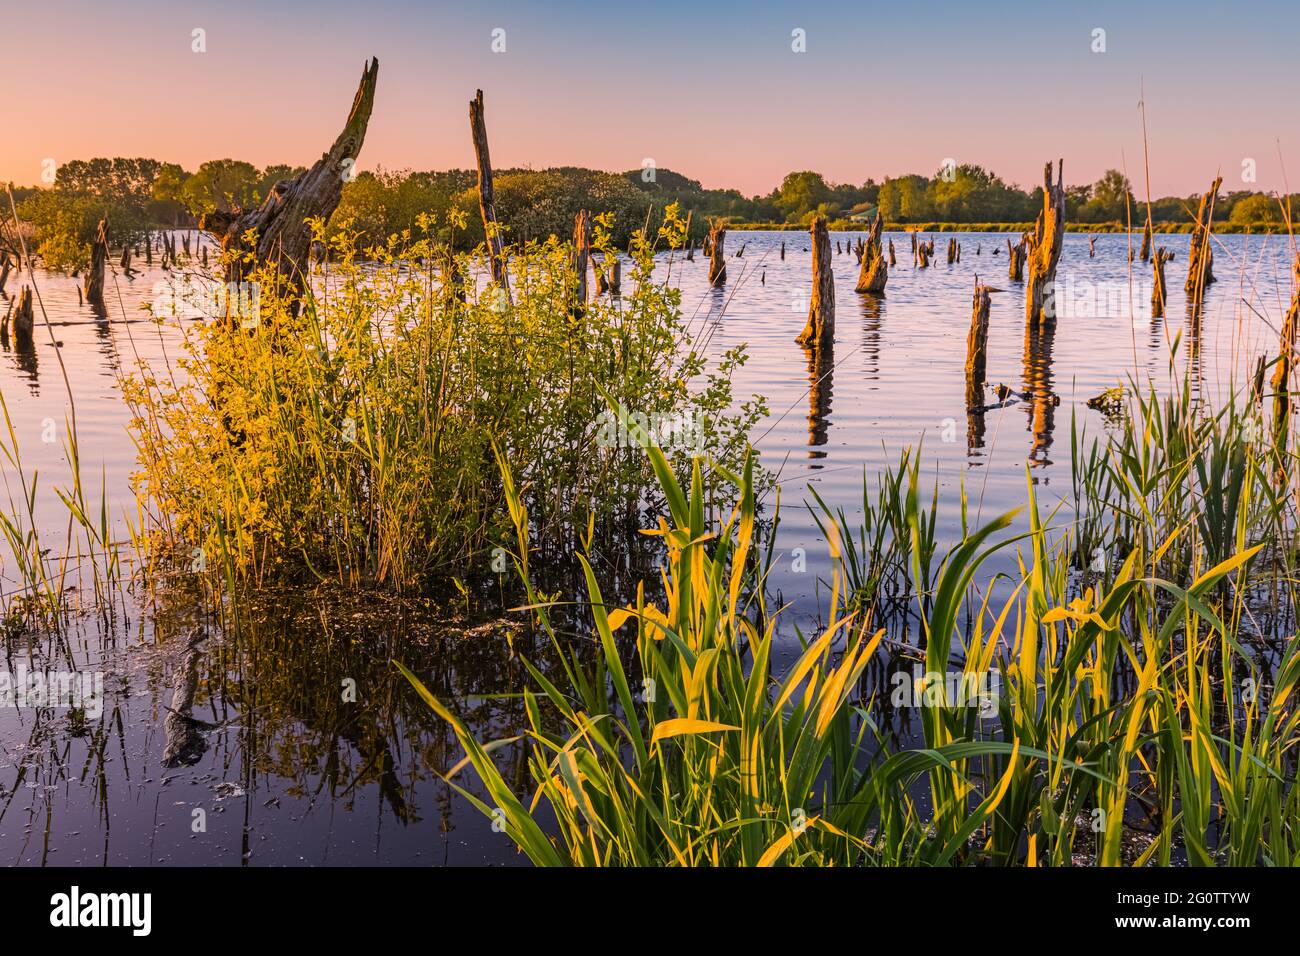 An evening at De Alde Feanen National Park, a national park in the Netherlands province of Friesland. The Alde Feanen is also a Natura 2000 area. Stock Photo